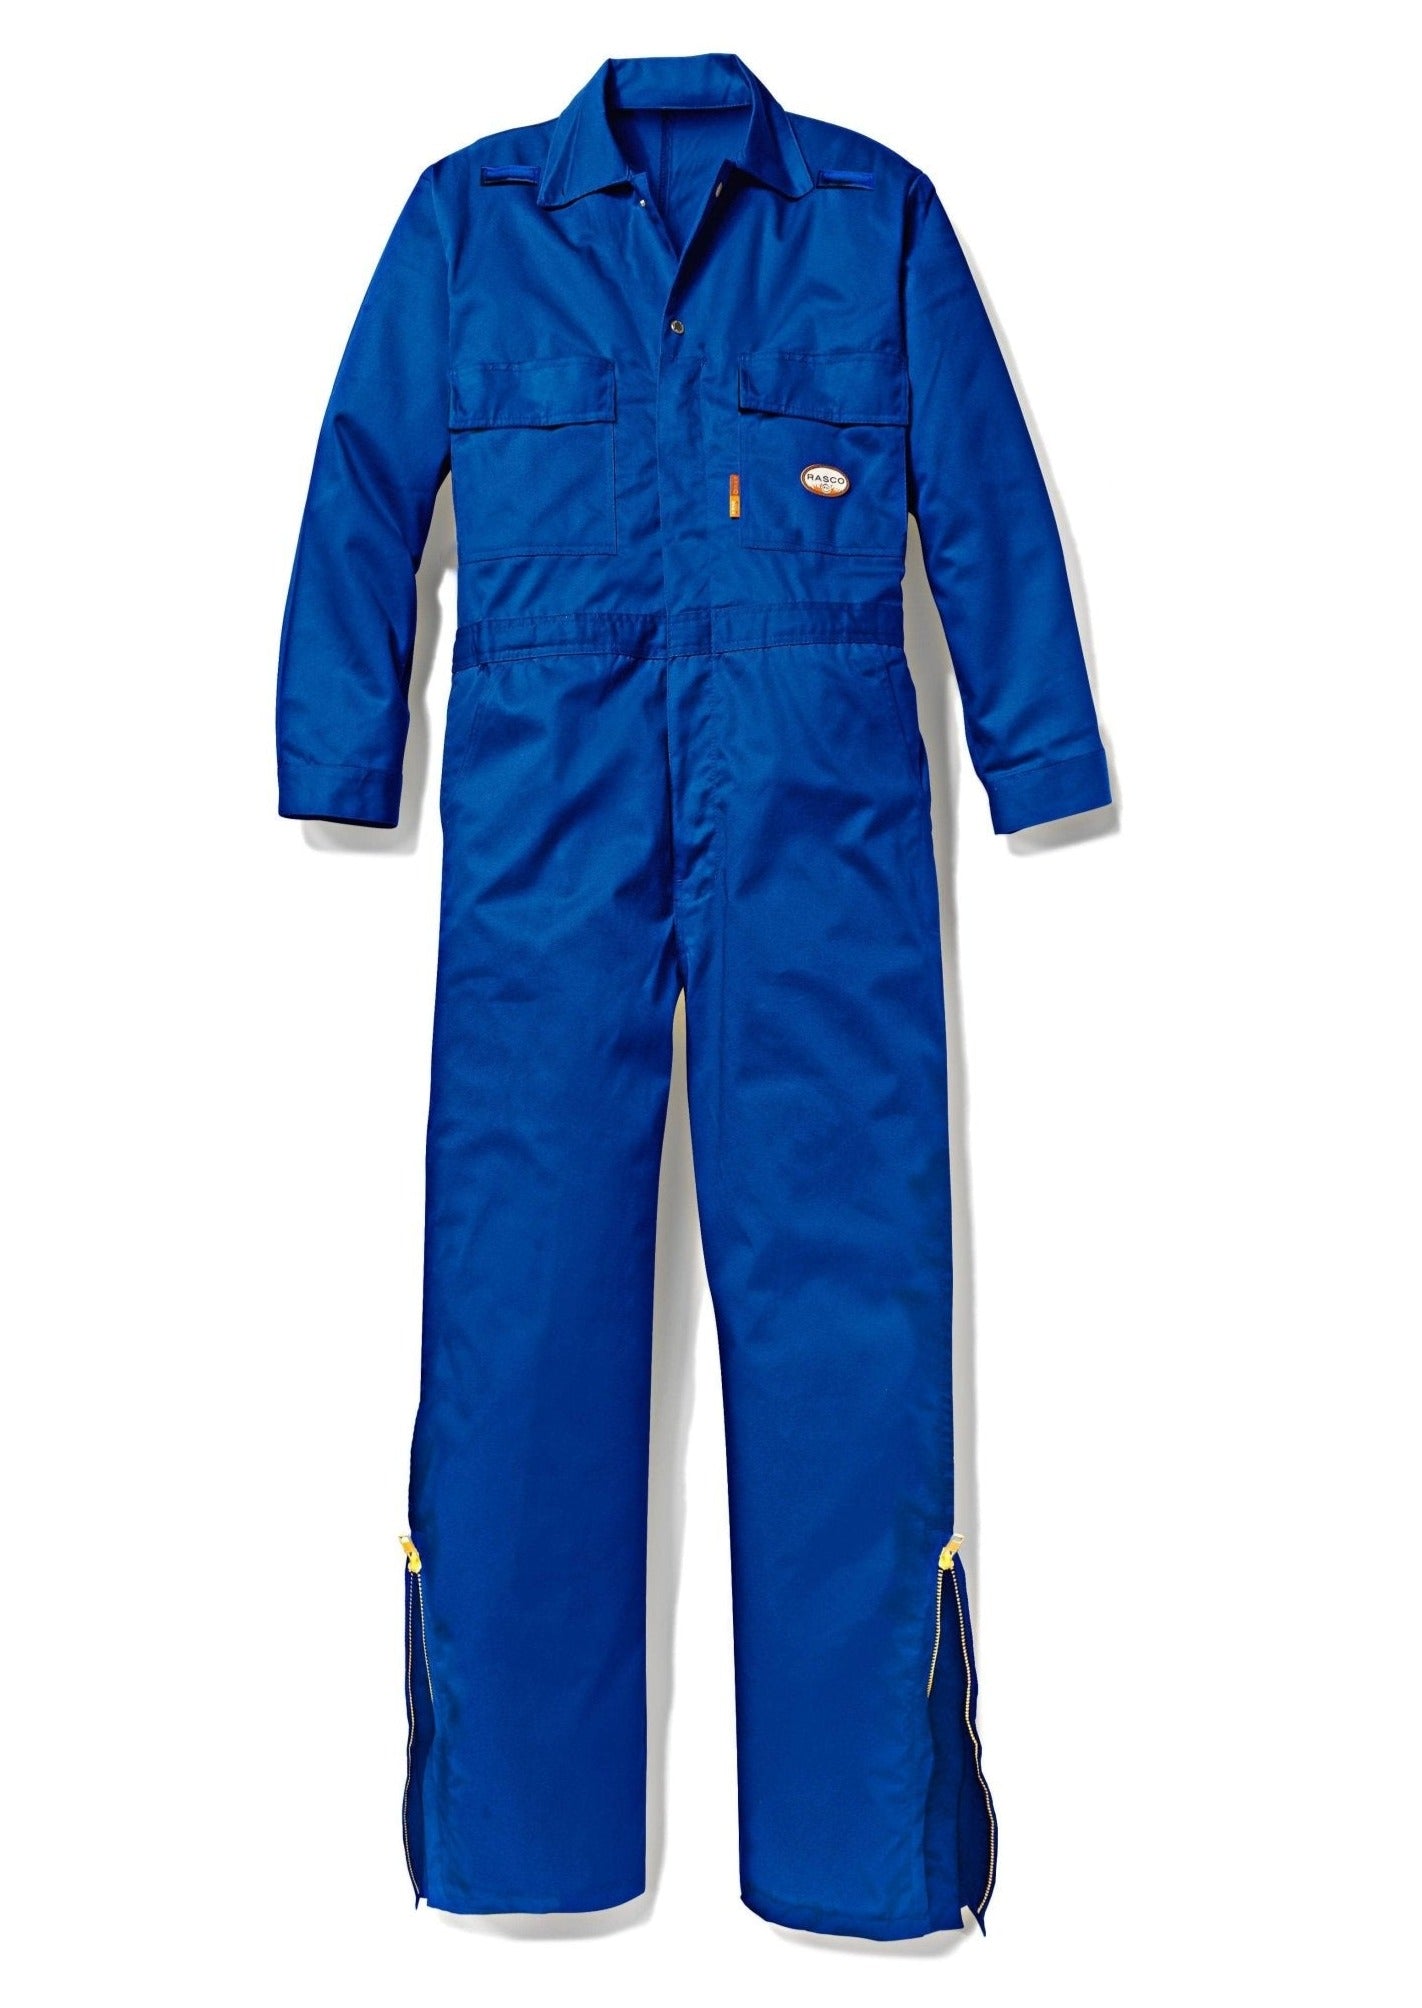 FR GlenGuard Coverall - Cool Blue (CLOSEOUT) - Rasco FR